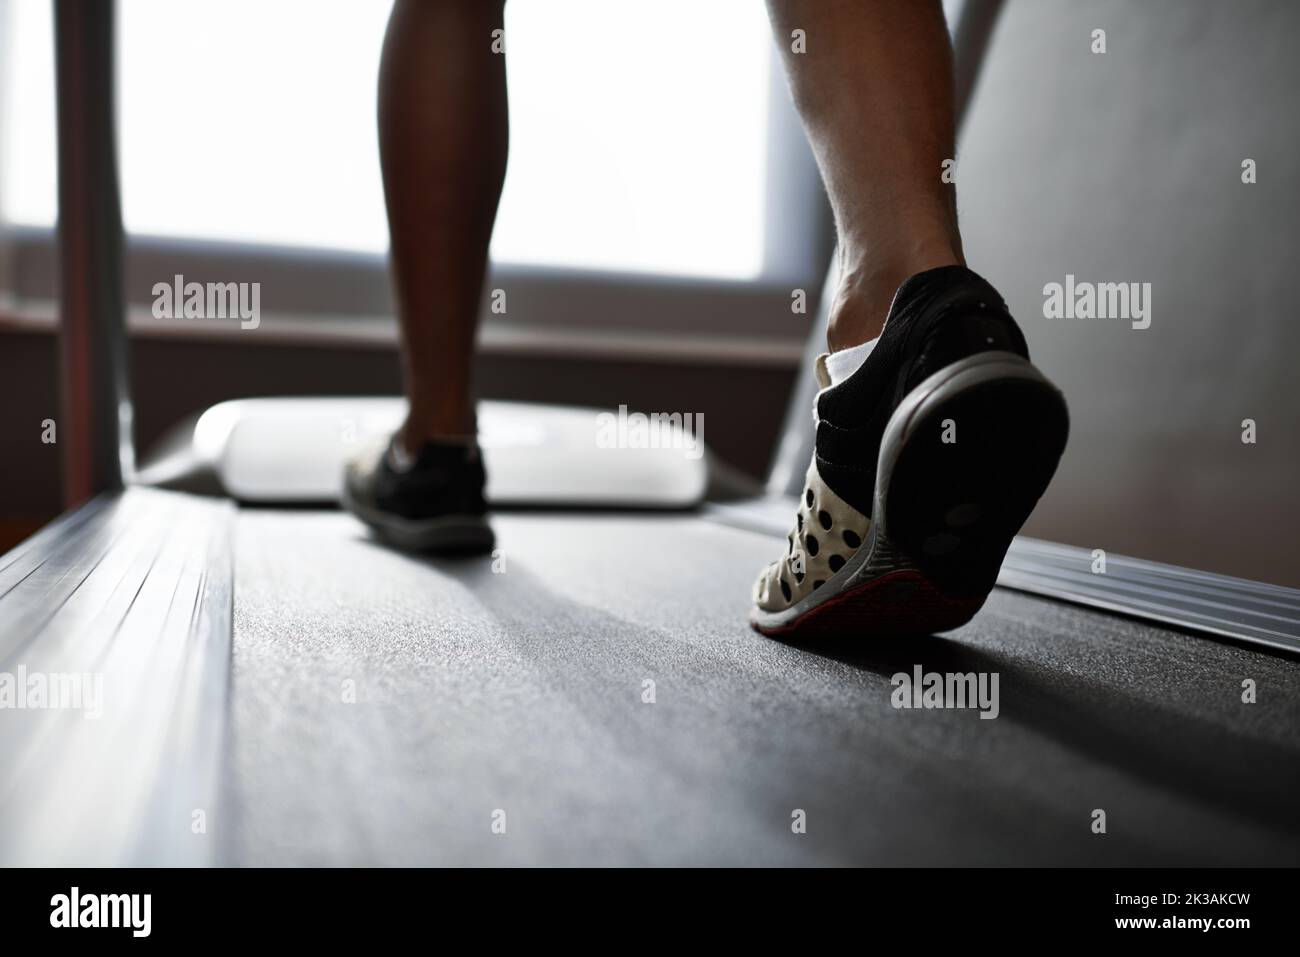 Running those calories off. Closeup shot of a man on a treadmill at the gym. Stock Photo